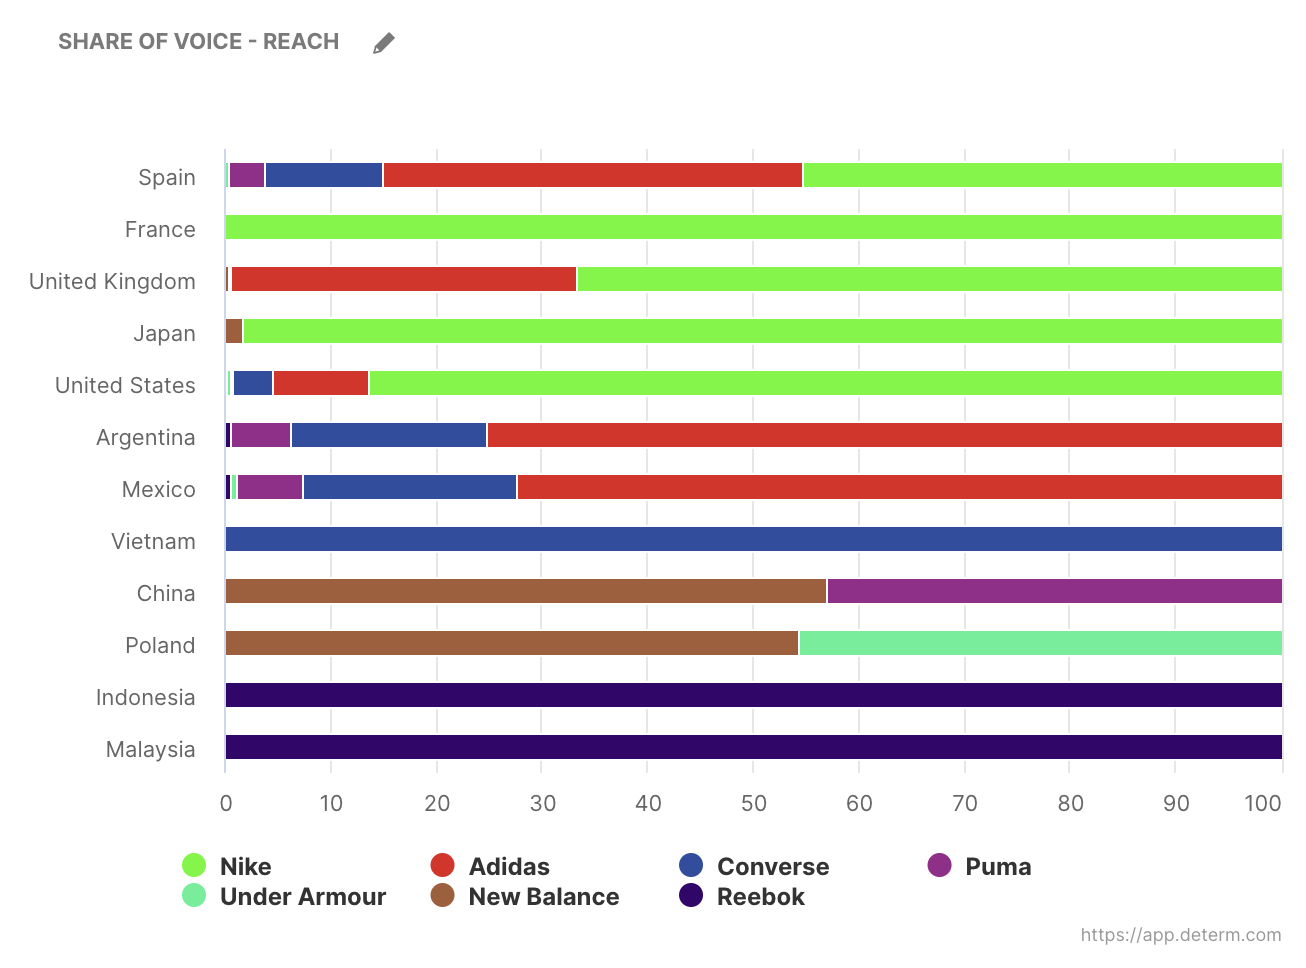 Metric Share of Voice, reach distribution for sports brands